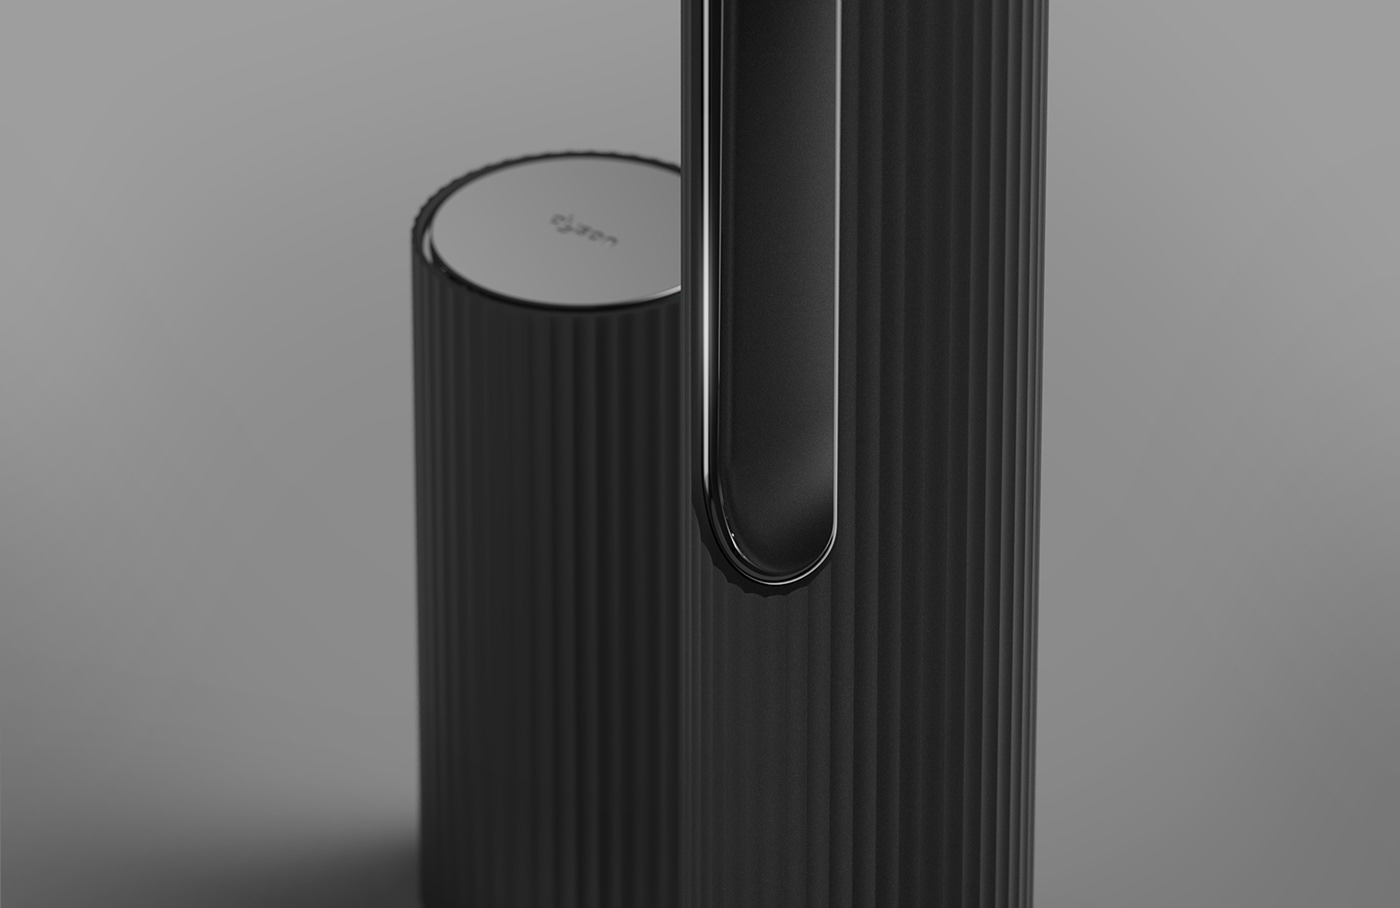 diffuser Dyson product process branding 